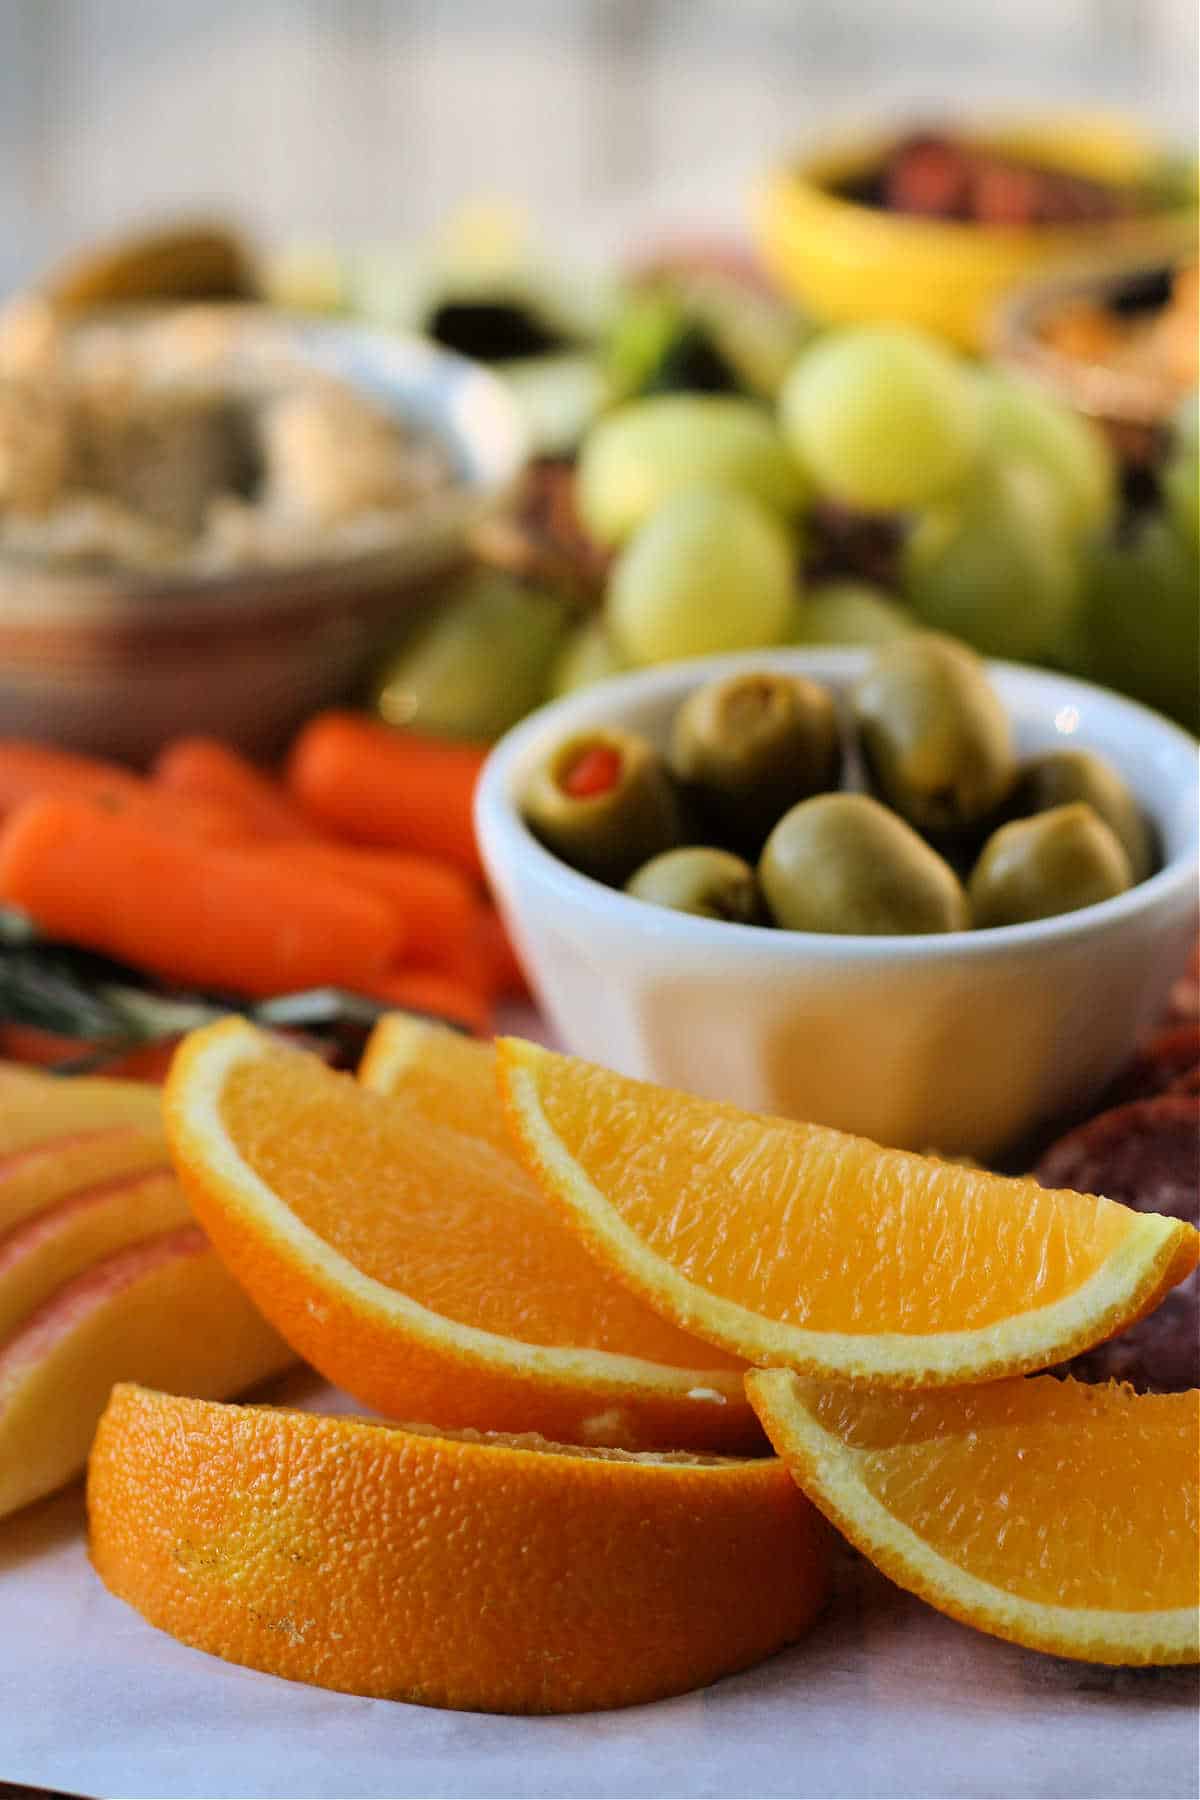 oranges and other charcuterie ingredients